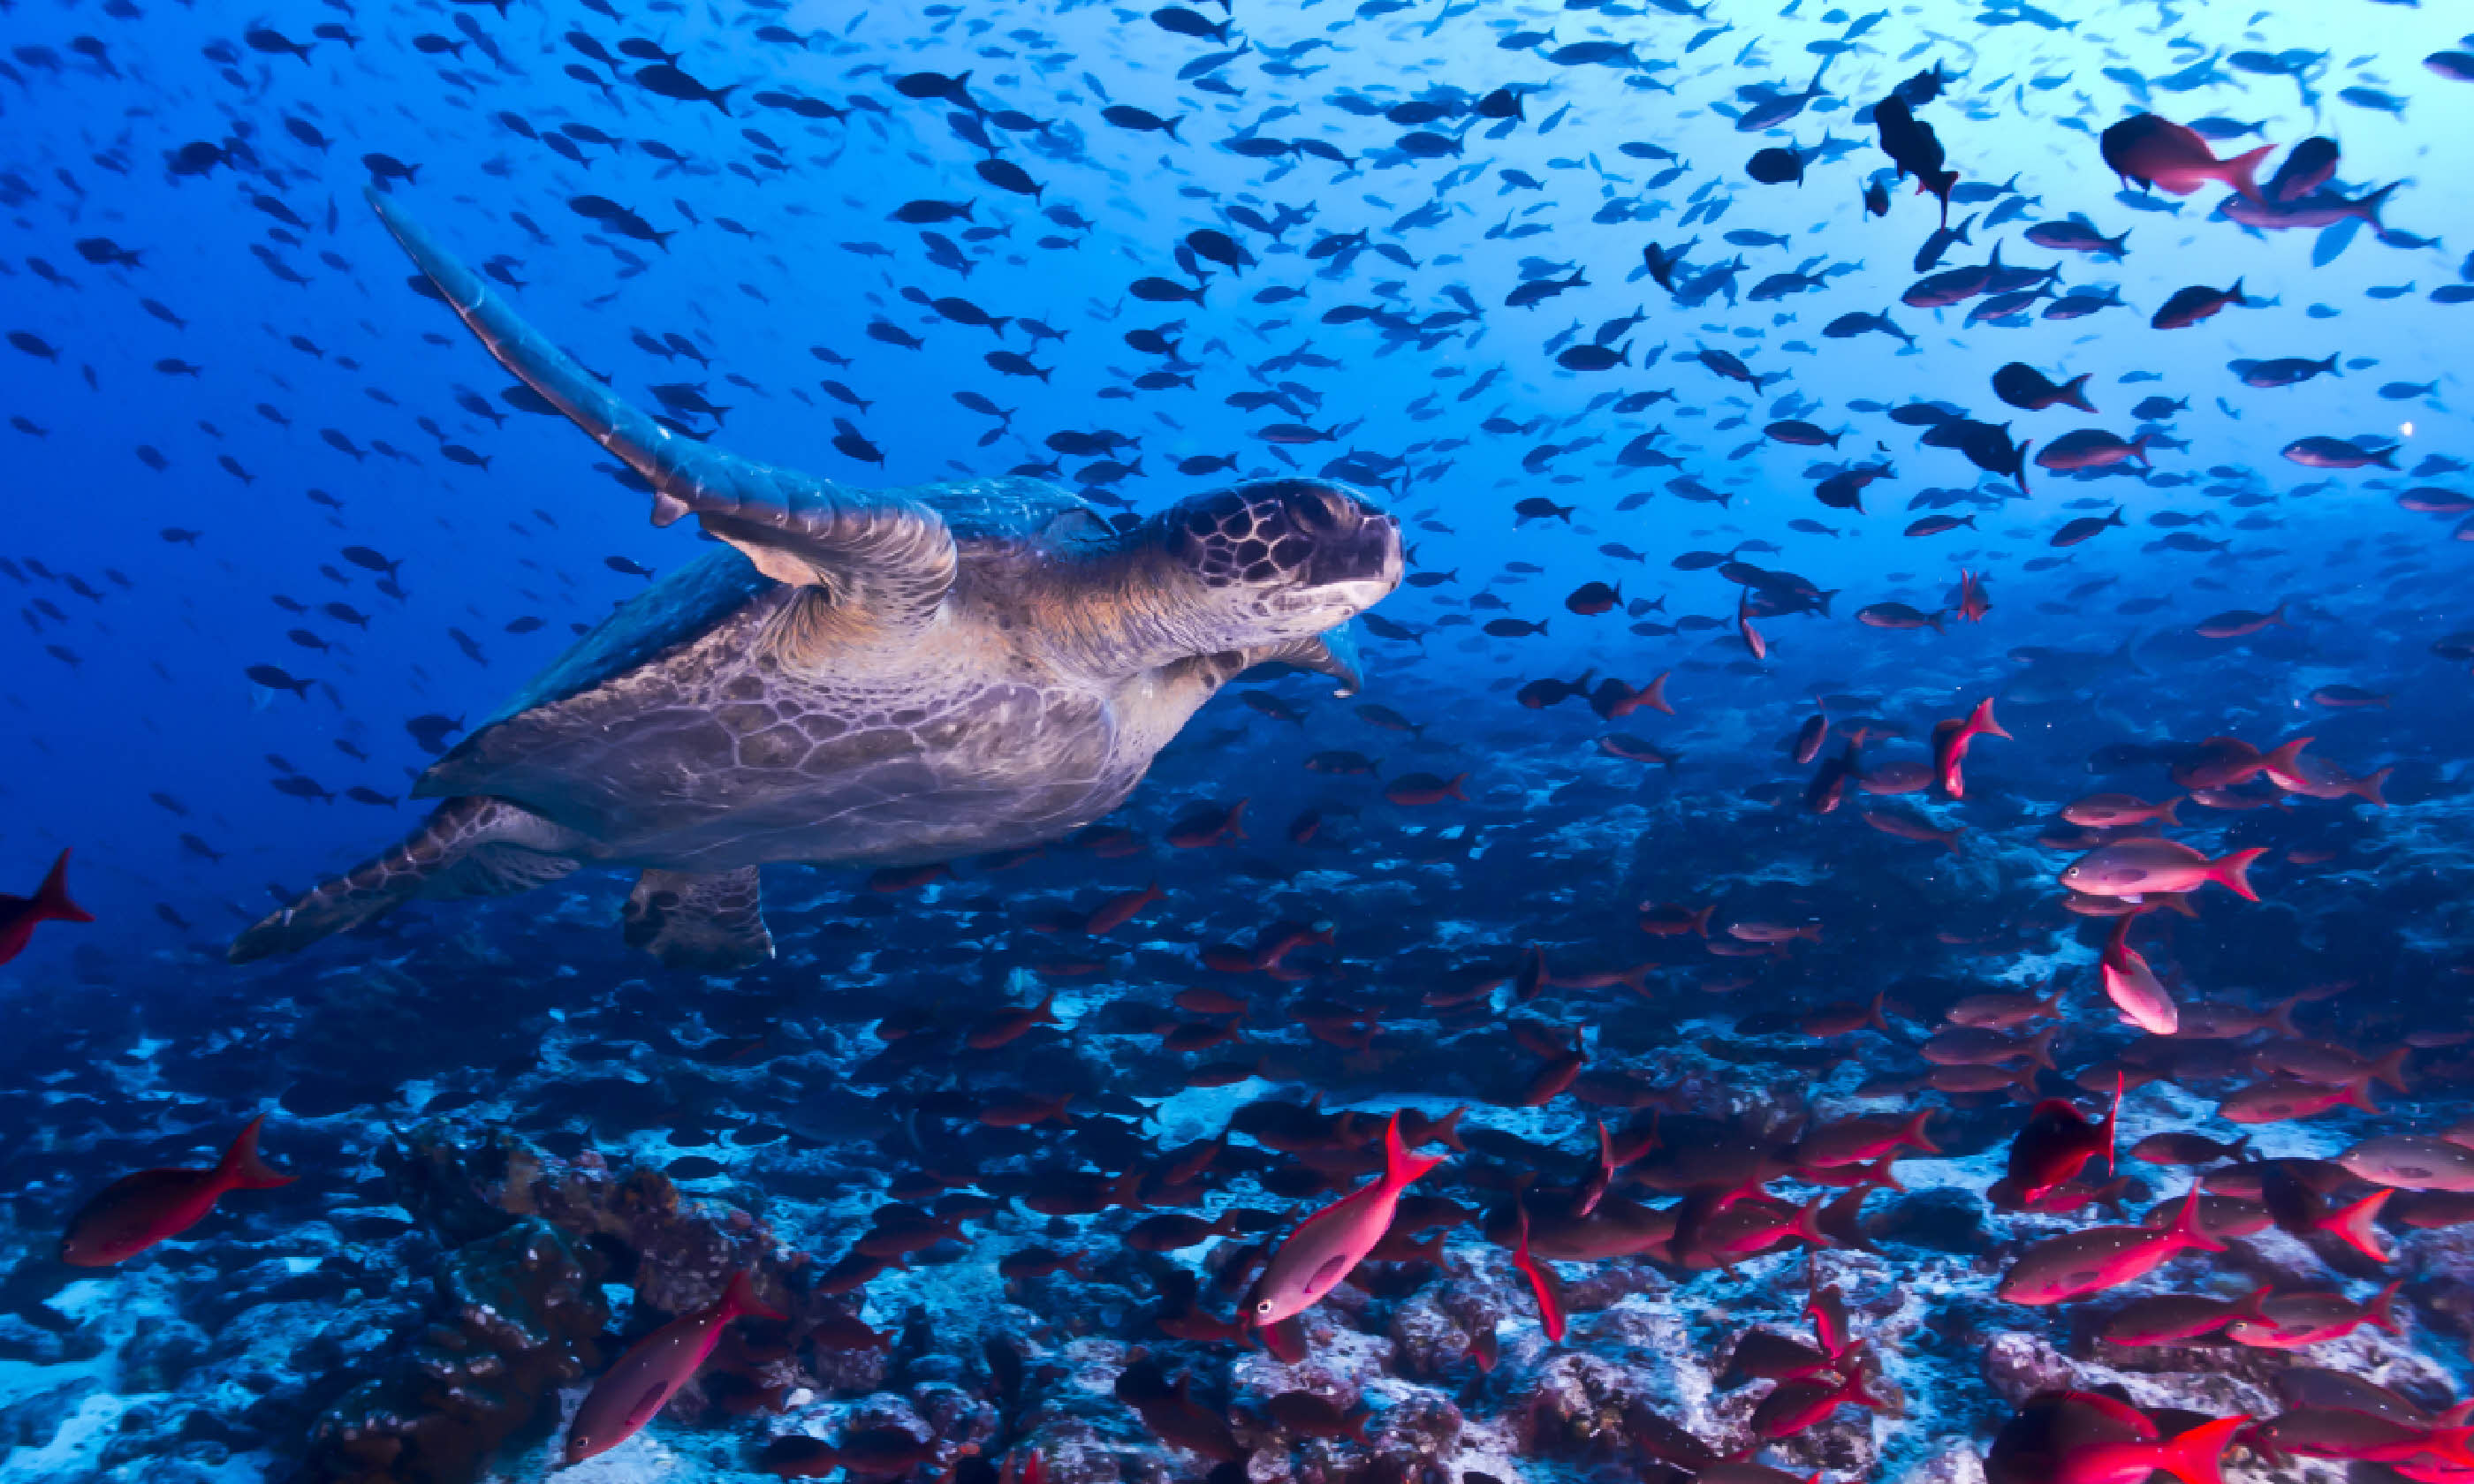 Turtle and fish, Galapagos (Shutterstock)